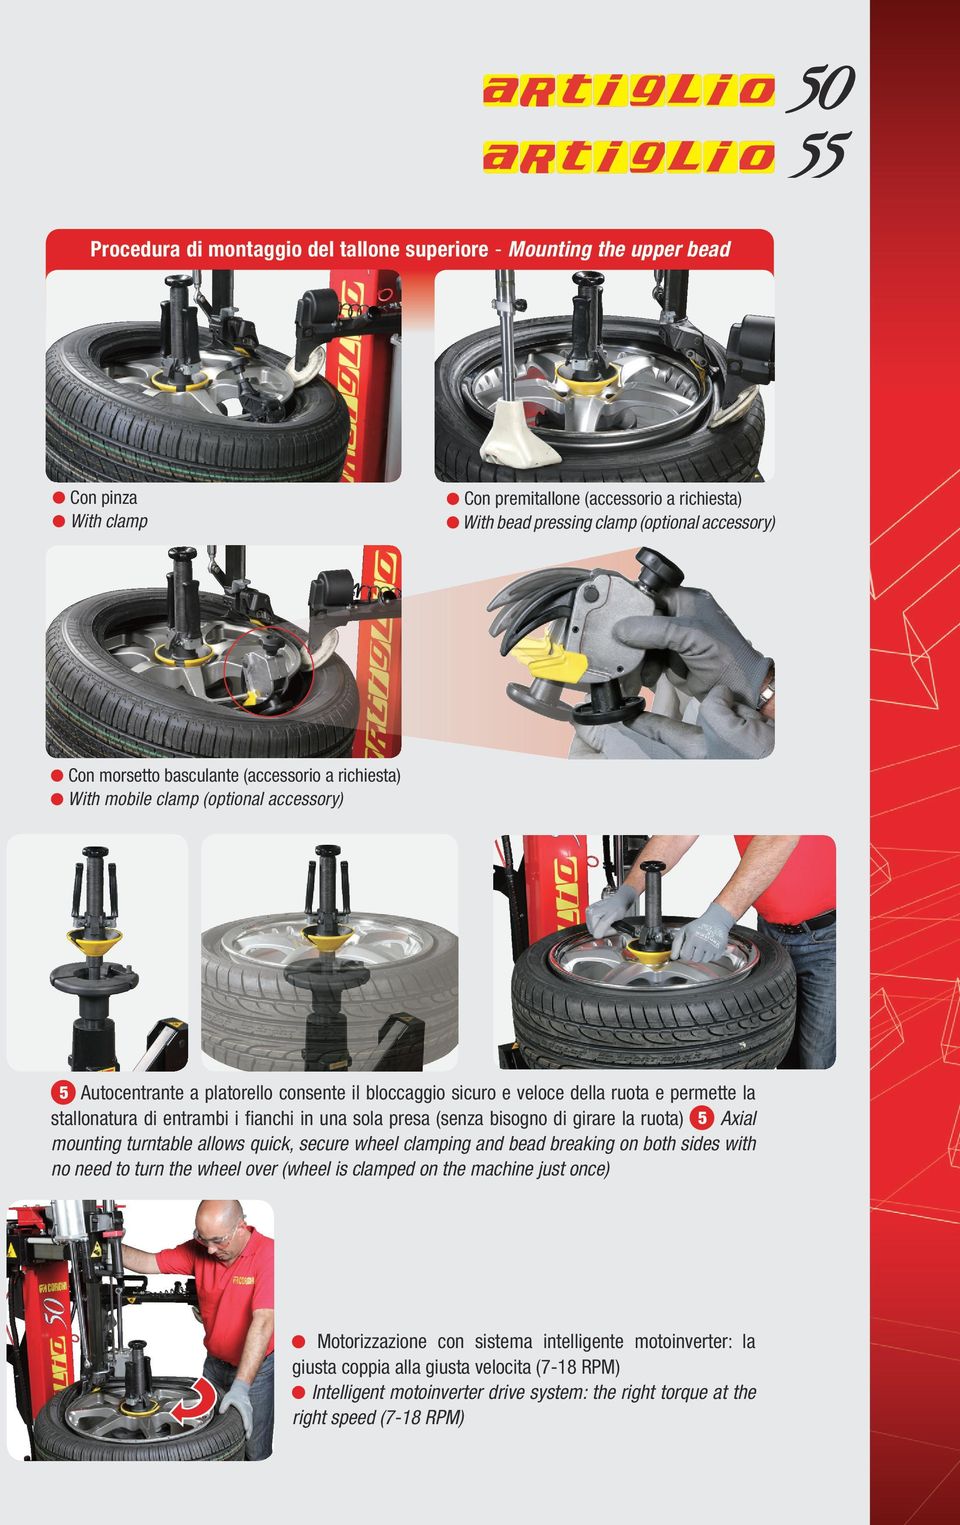 fianchi in una sola presa (senza bisogno di girare la ruota) Axial mounting turntable allows quick, secure wheel clamping and bead breaking on both sides with no need to turn the wheel over (wheel is